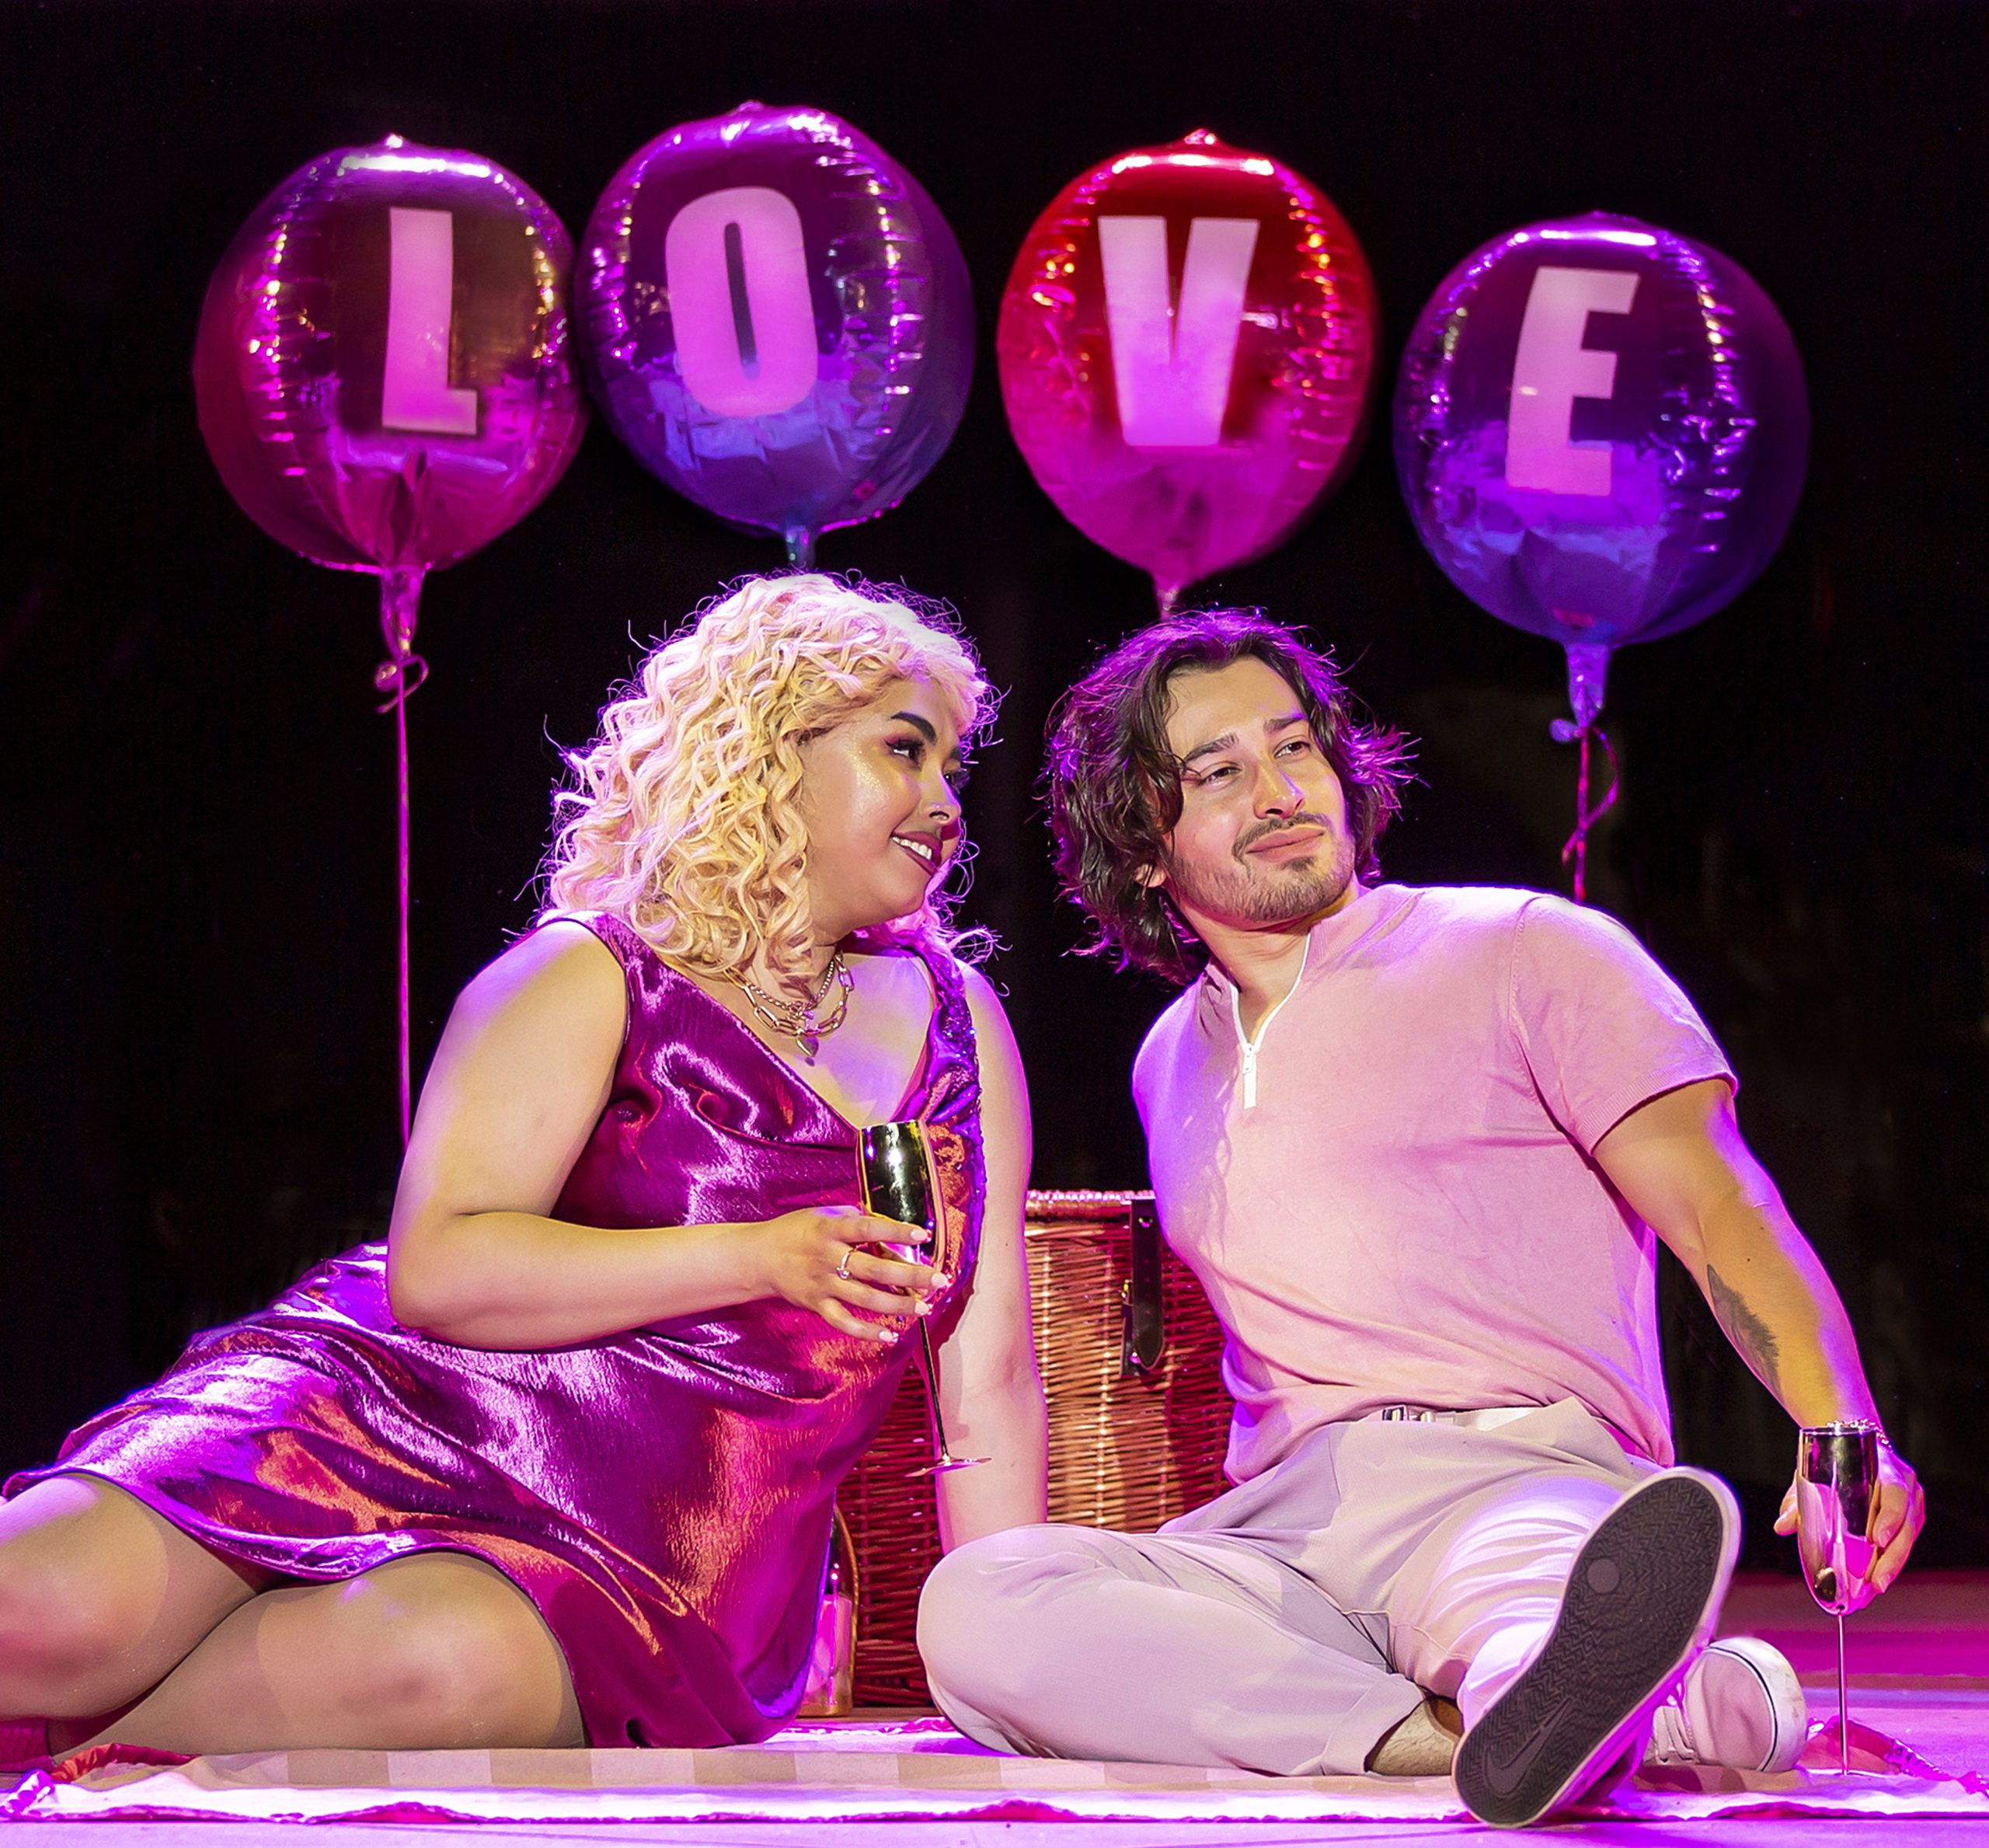 Courtney Bowman (Elle), Alistair Toovey (Warner) in Legally Blonde at Regent's Park Open Air Theatre. Photo Pamela Raith